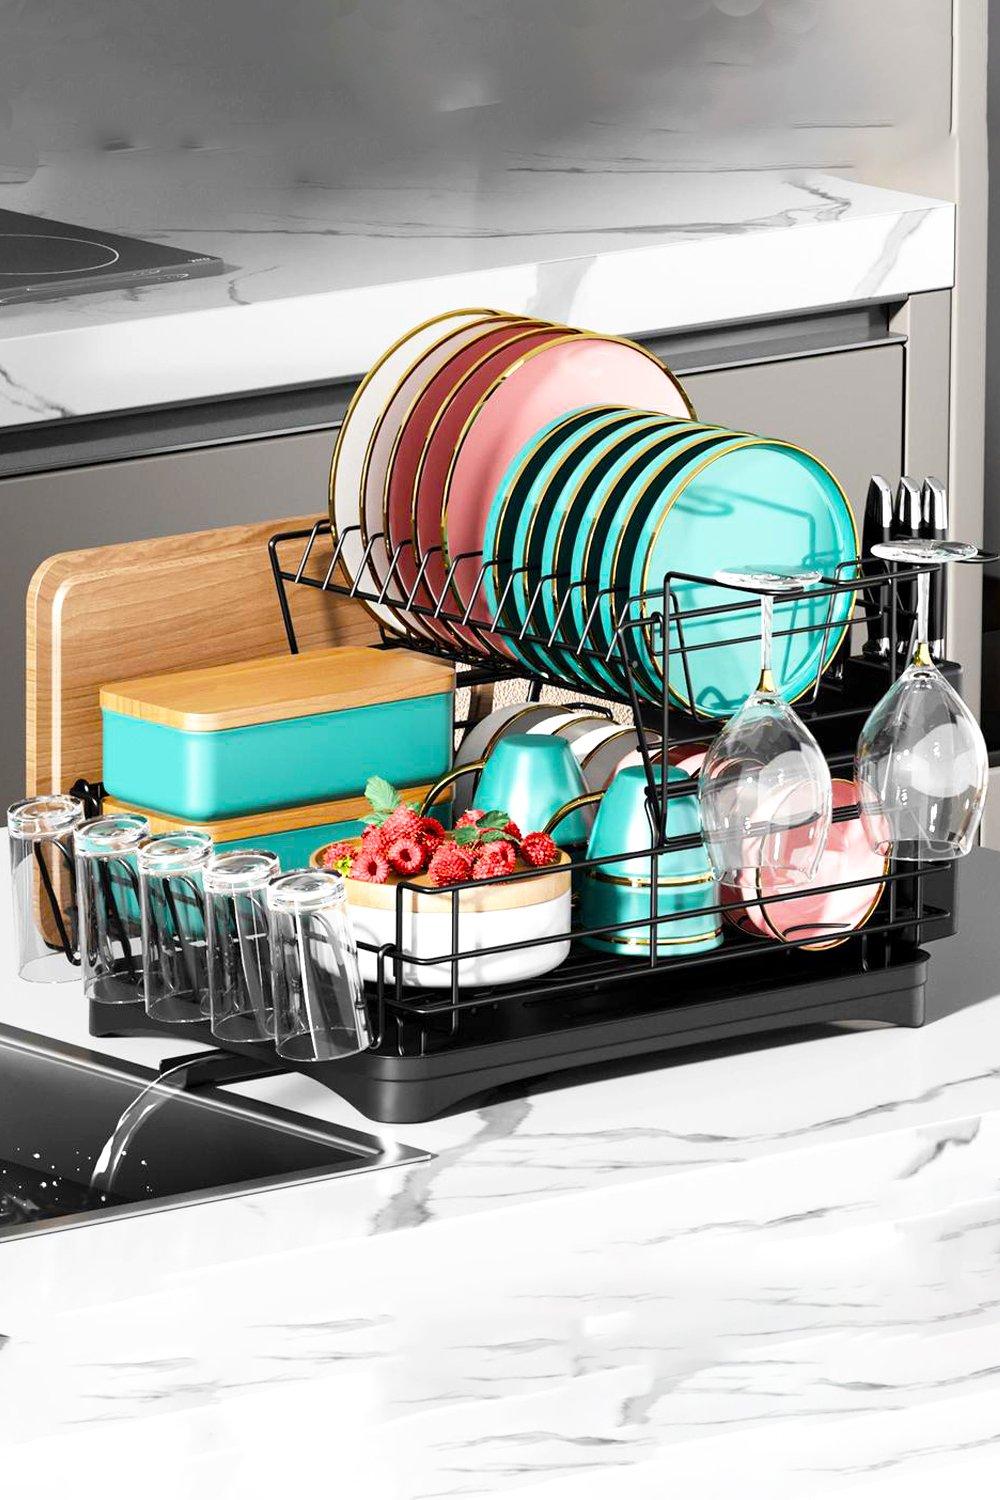 2-Tier Detachable Dish Drainer Rack Multifunctional Drainage Rack with Cup Holder and Kitchen Utensi